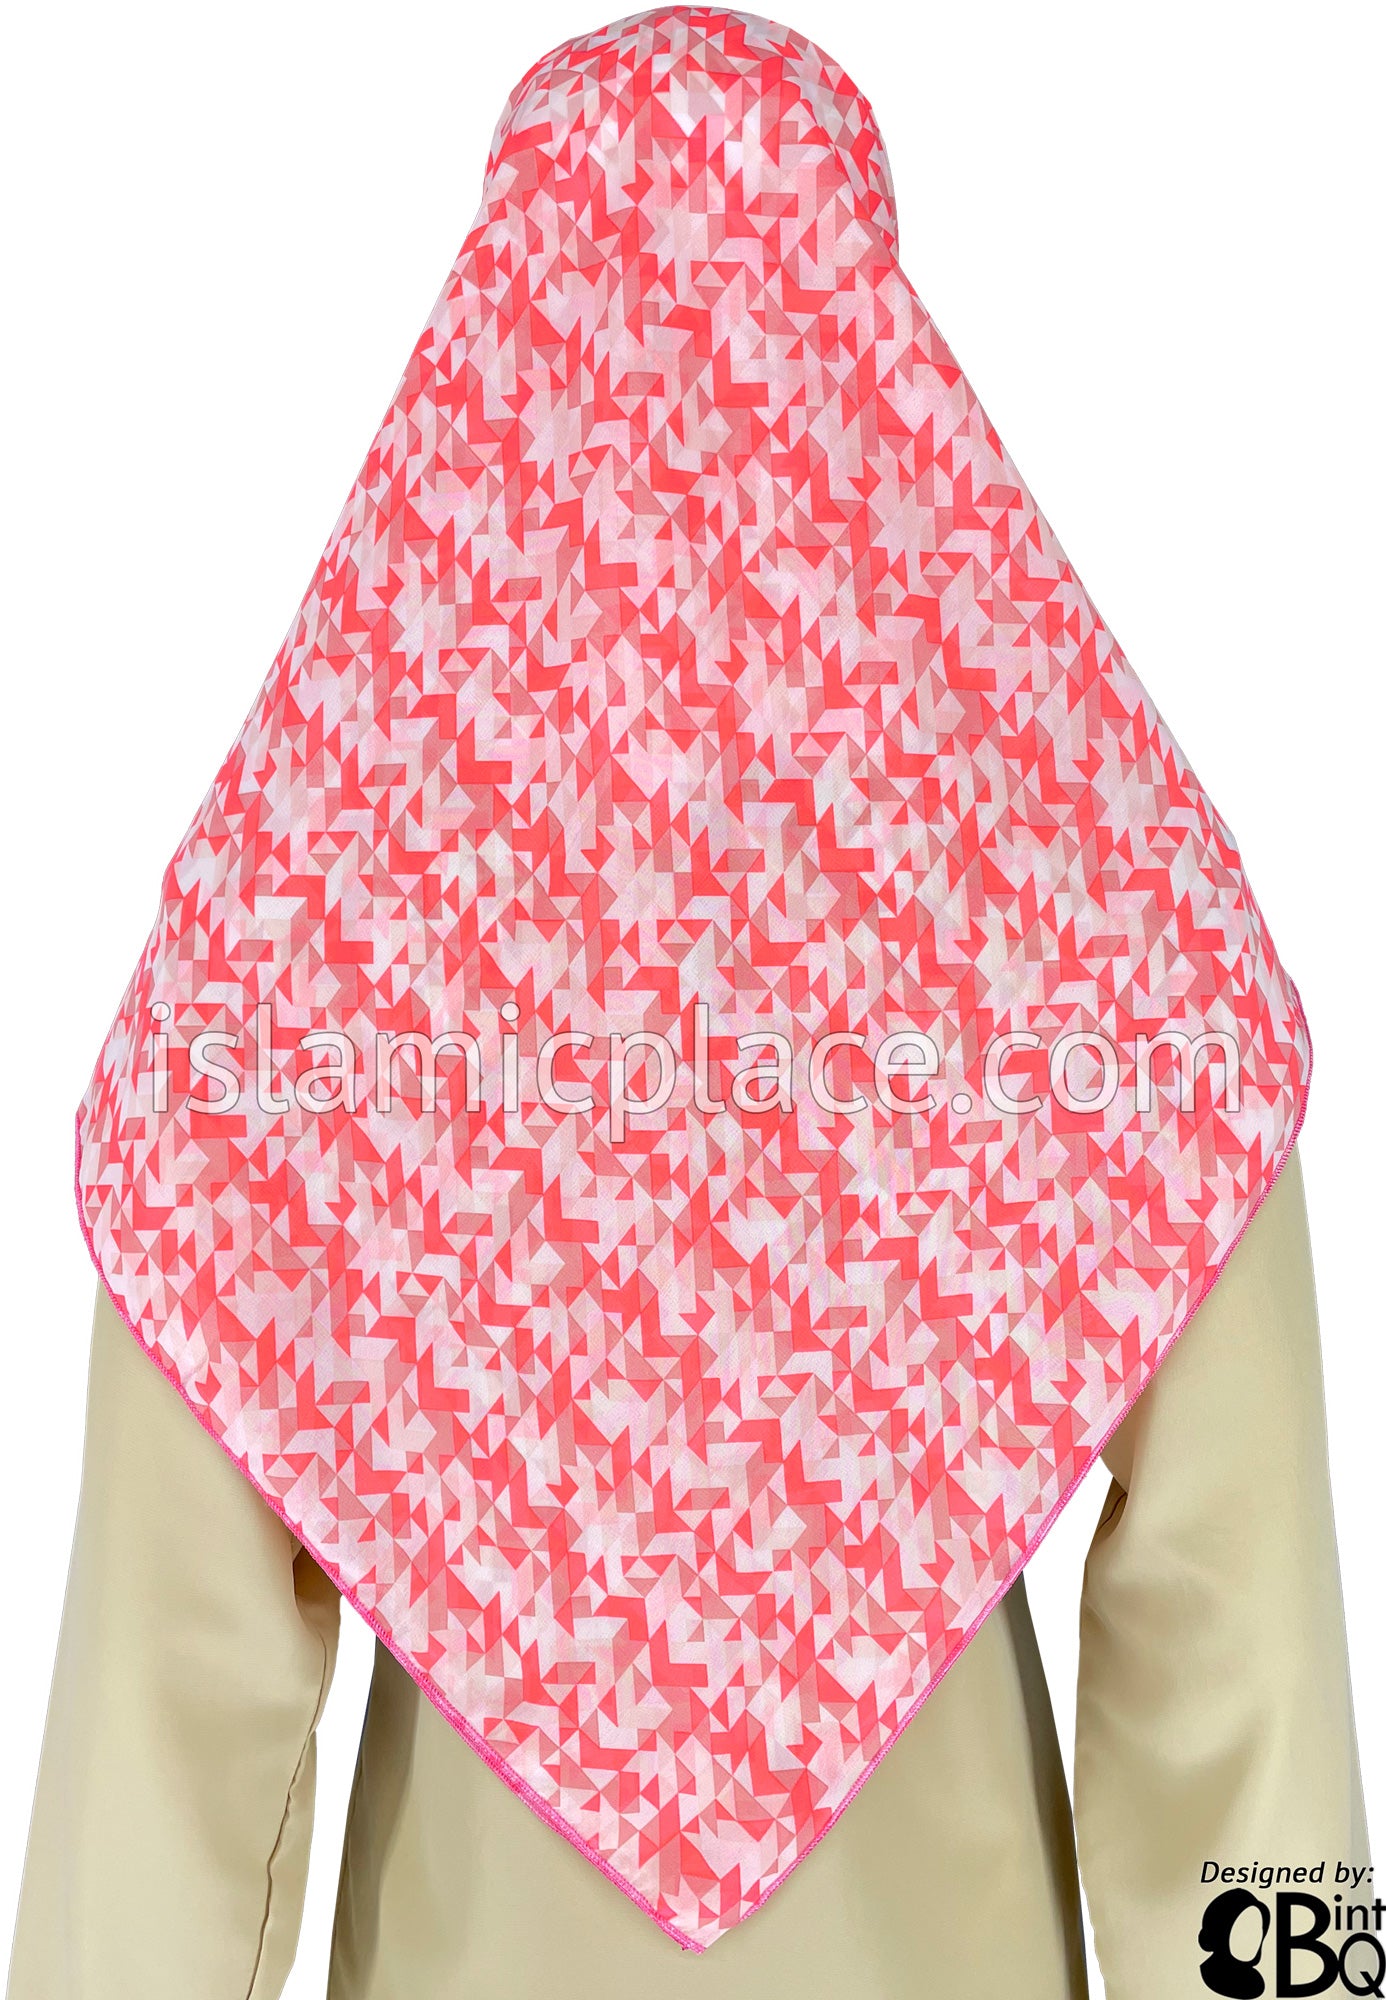 Coral, Muave, White and Pink Flake Pattern - 45" Square Printed Khimar